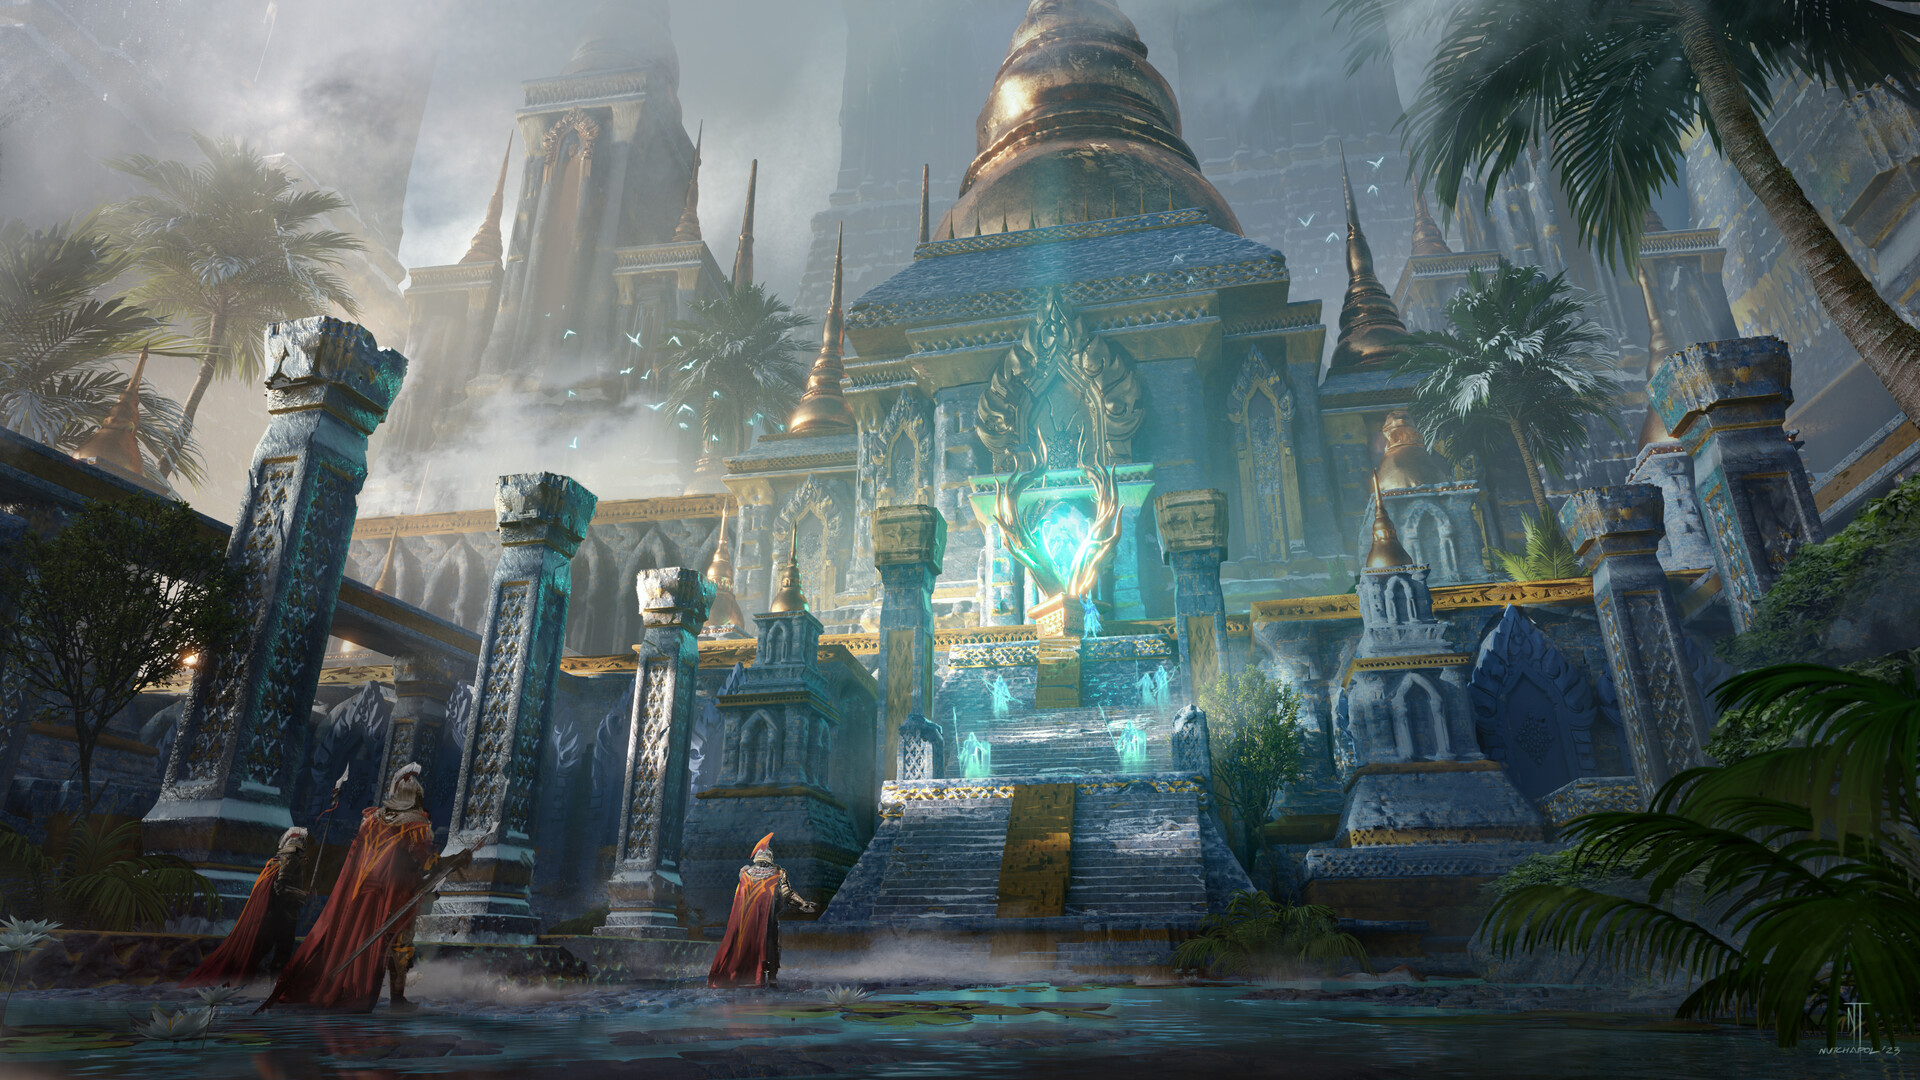 Blue Ancient Temple by Nutchapol Thitinunthakorn